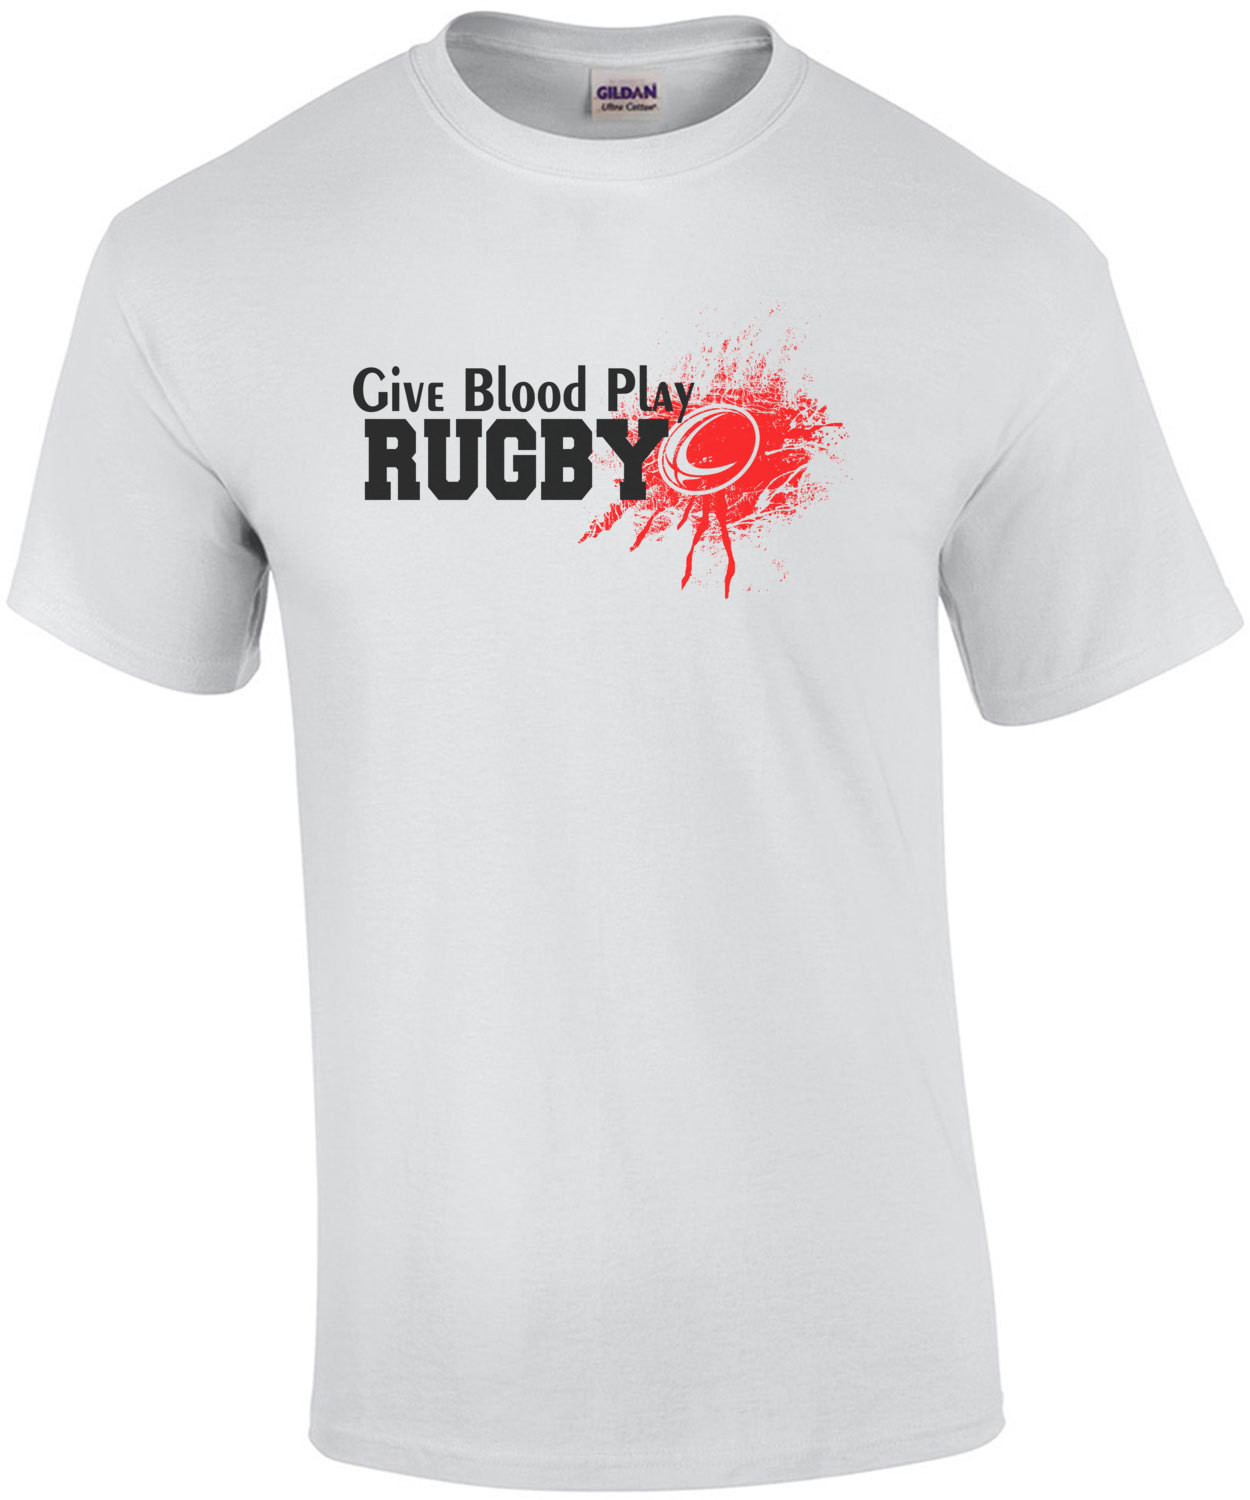 Give Blood Play Rugby T-Shirt